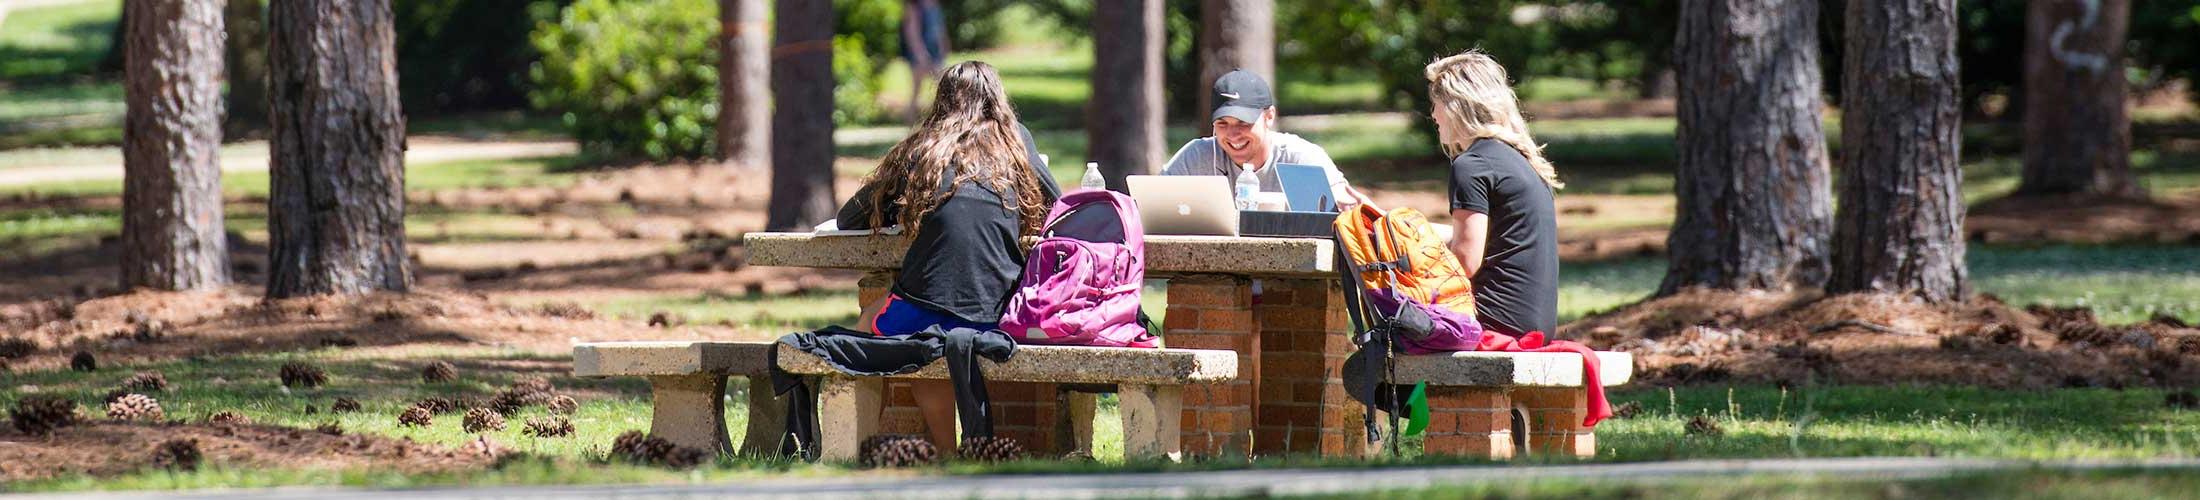 Students studying at a table outdoors on campus.